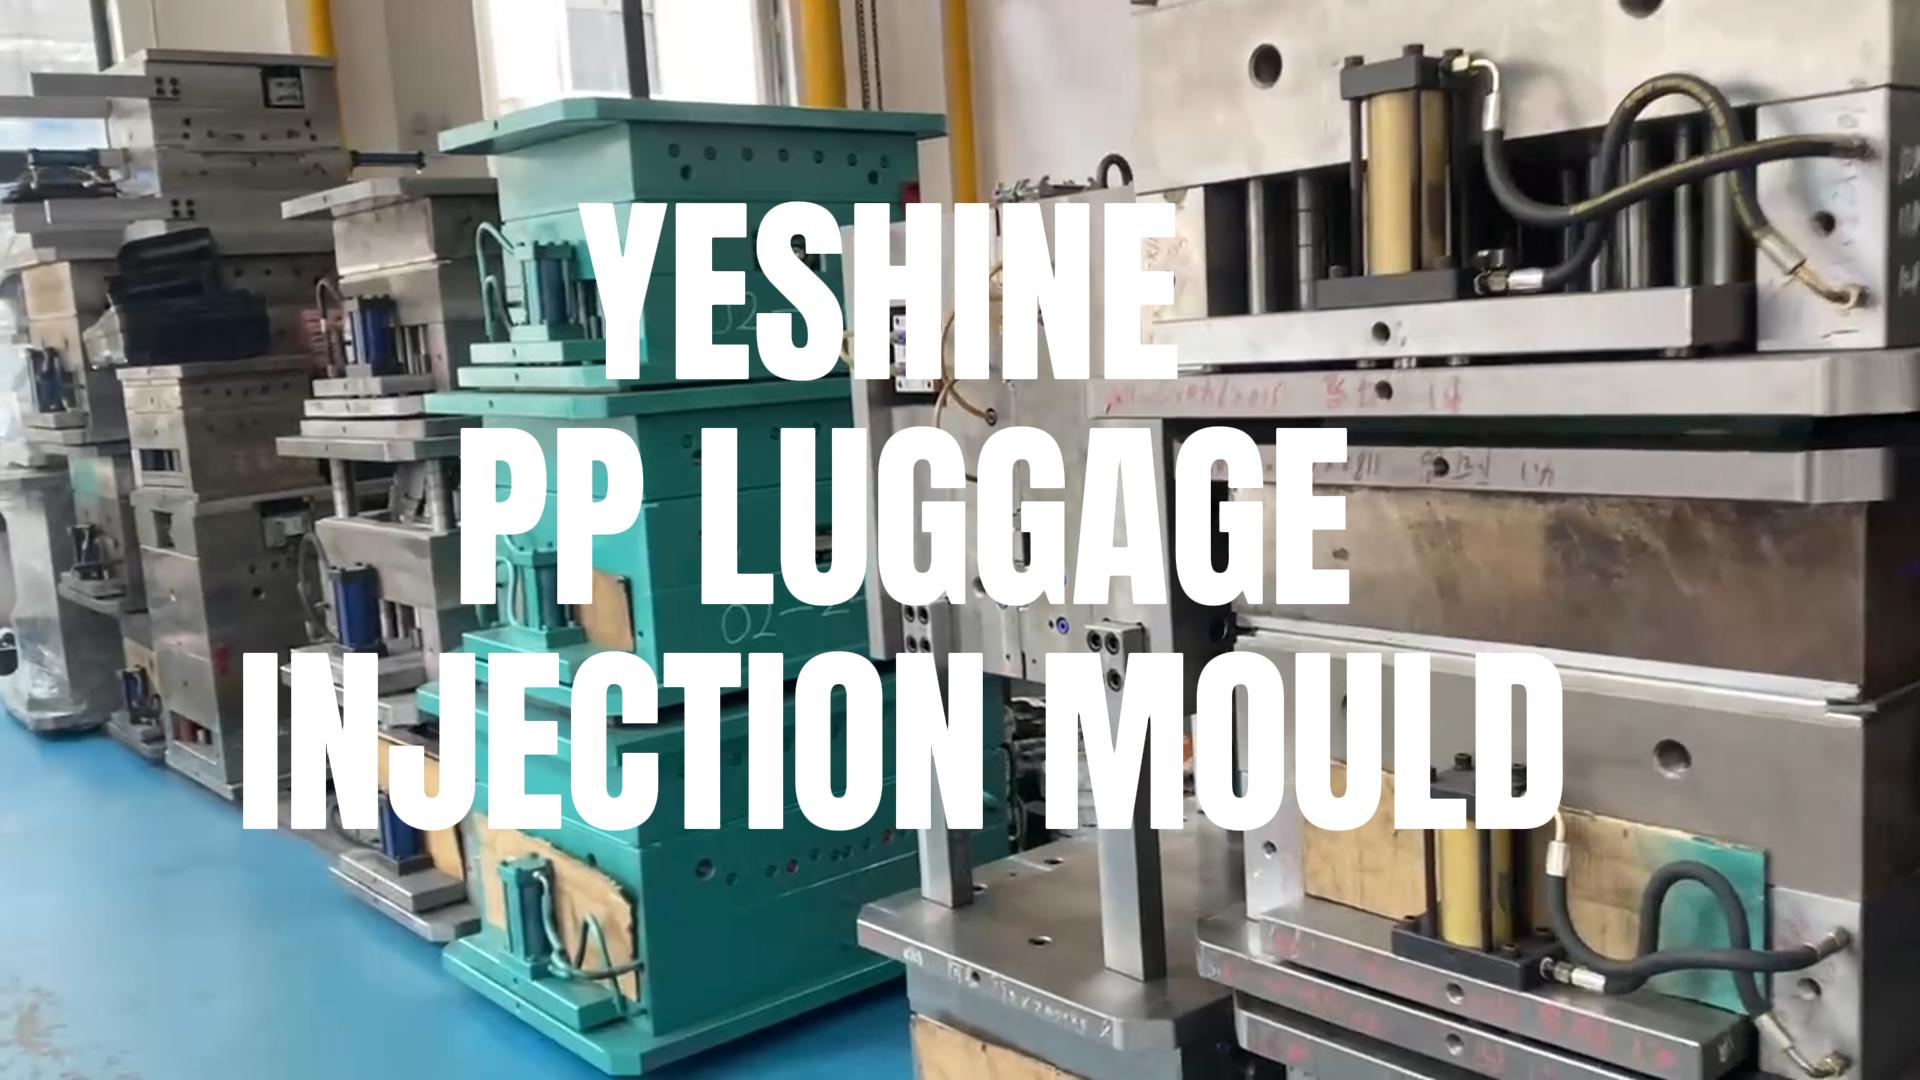 YESHINE PP Luggage injection mold factory is operating at full capacity